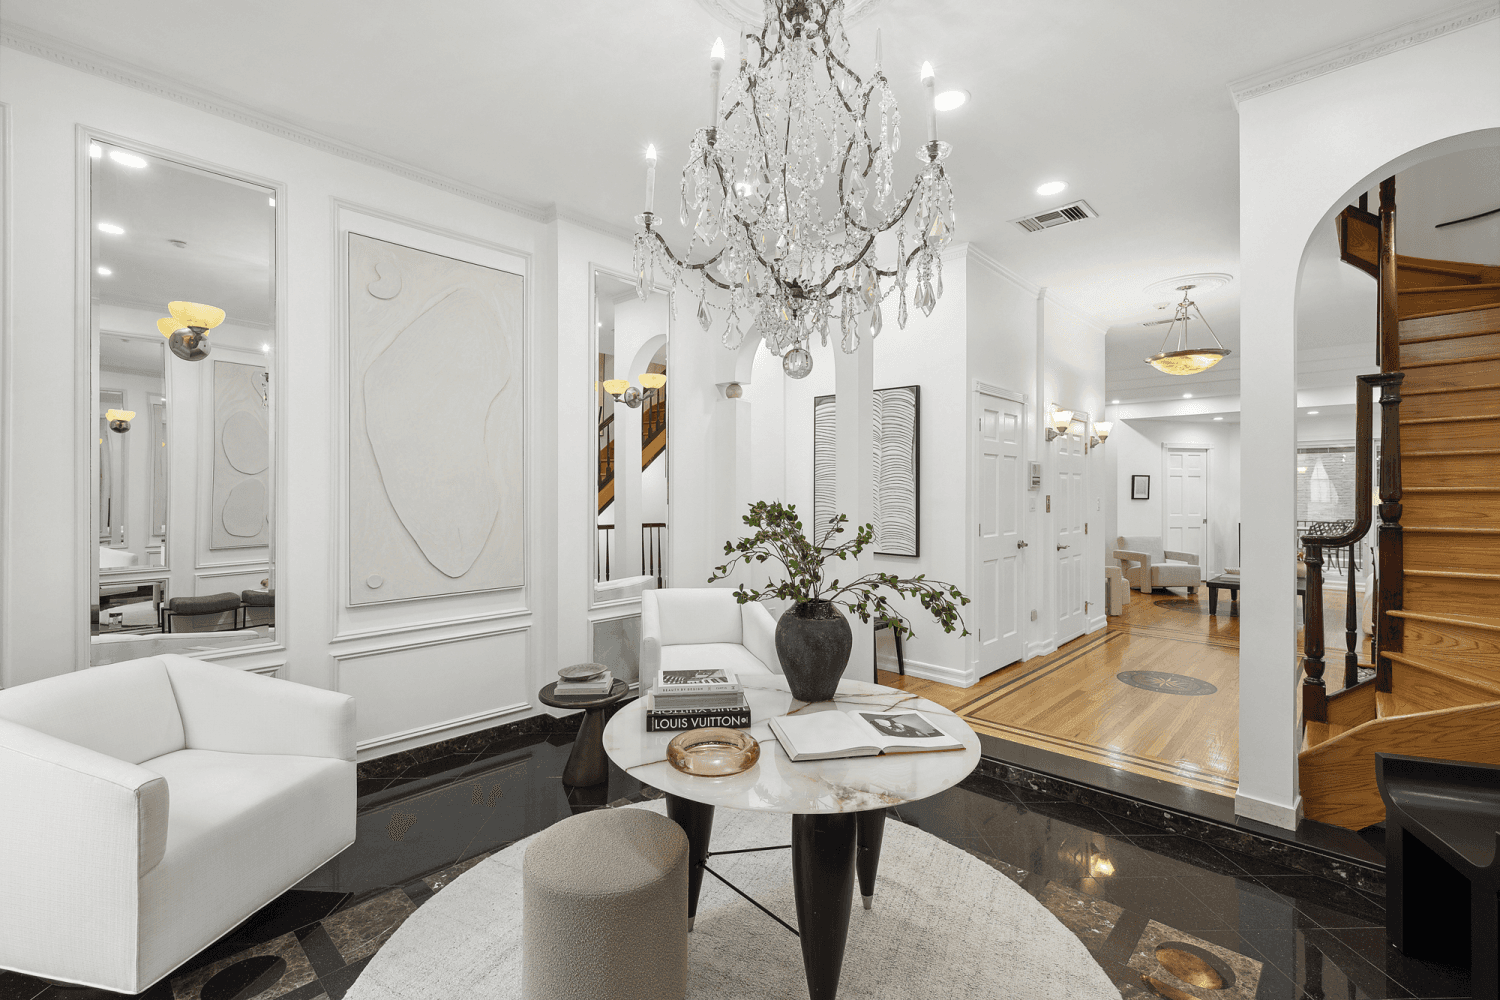 INTRODUCING THE ONLY CONTEMPORARY LANDMARKED TOWNHOUSE IN ALL OF MURRAY HILL, OFF PARK AVENUEEXTREMELY LOW TAXES OF ONLY 4, 795 PER MONTH MAKE THIS AN EXCEPTIONAL OPPORTUNITY INVESTORS AND PRIMARY ...